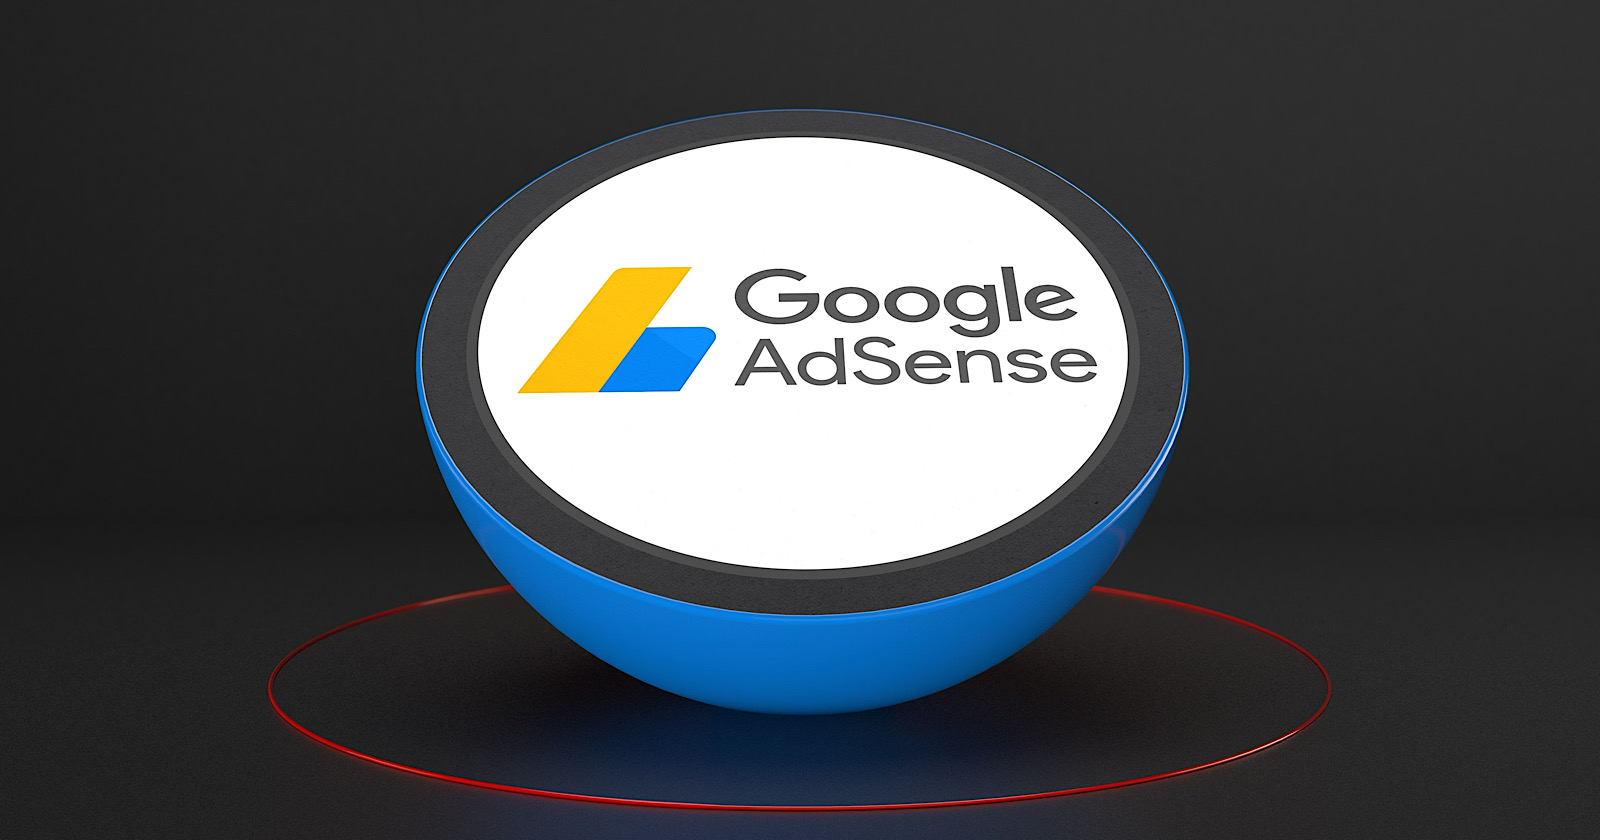 A Google AdSense featured prominently on a blue and white spherical surface